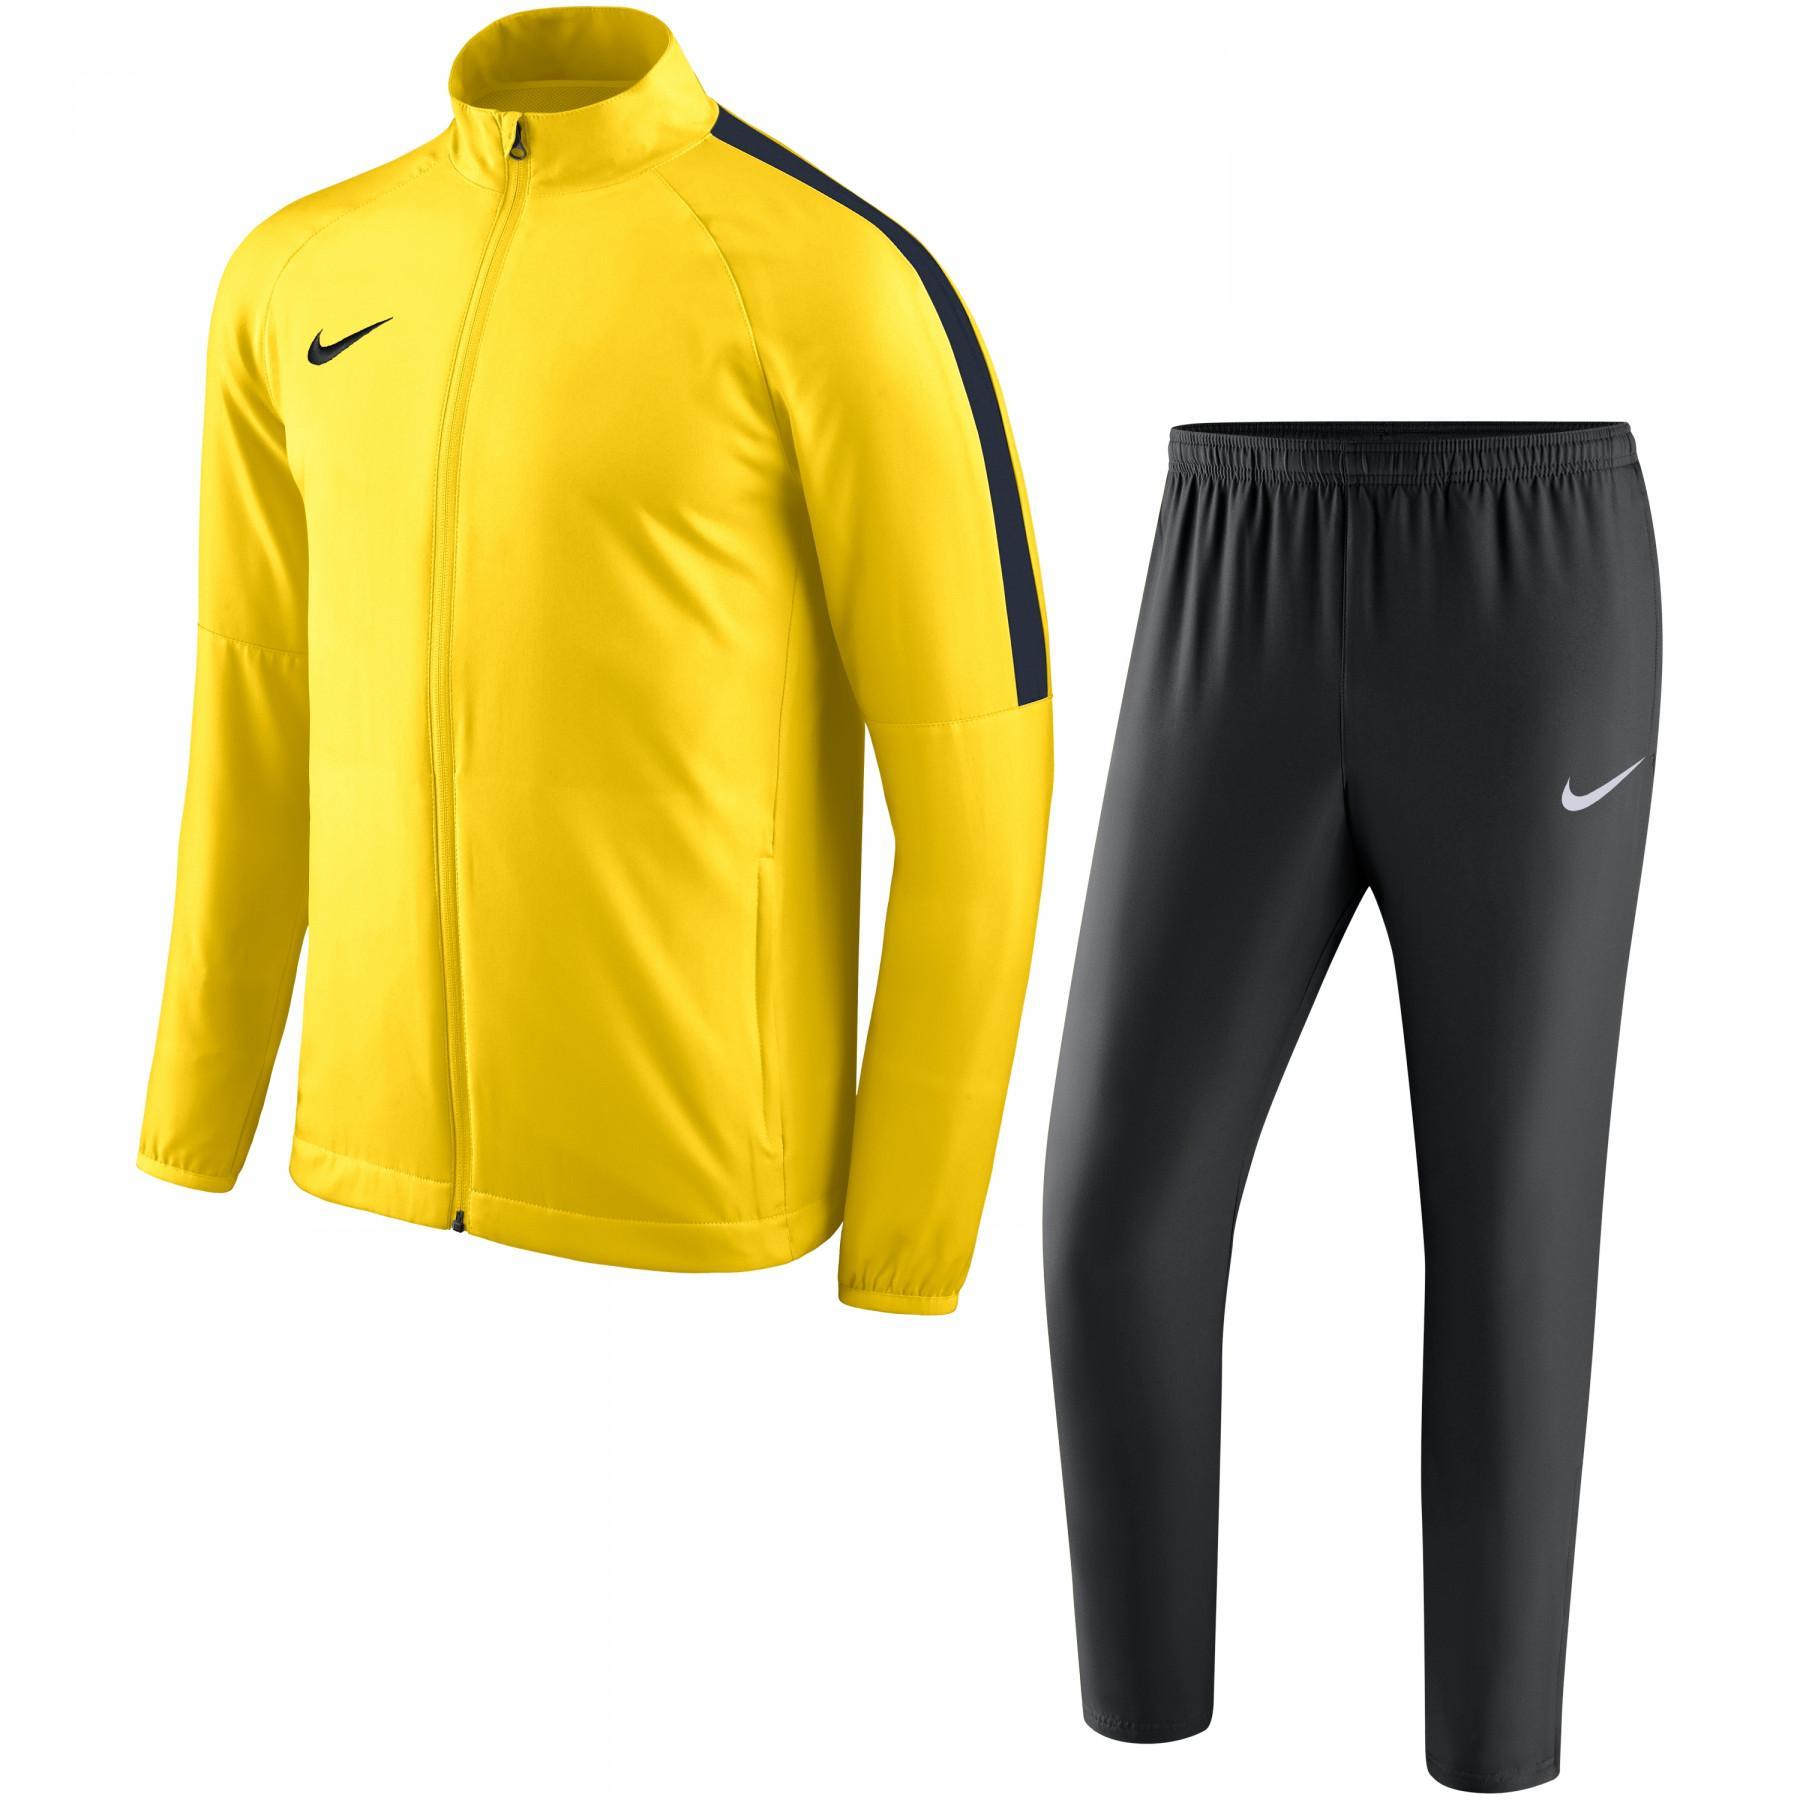 Track suit for children Nike Dry Academy 18